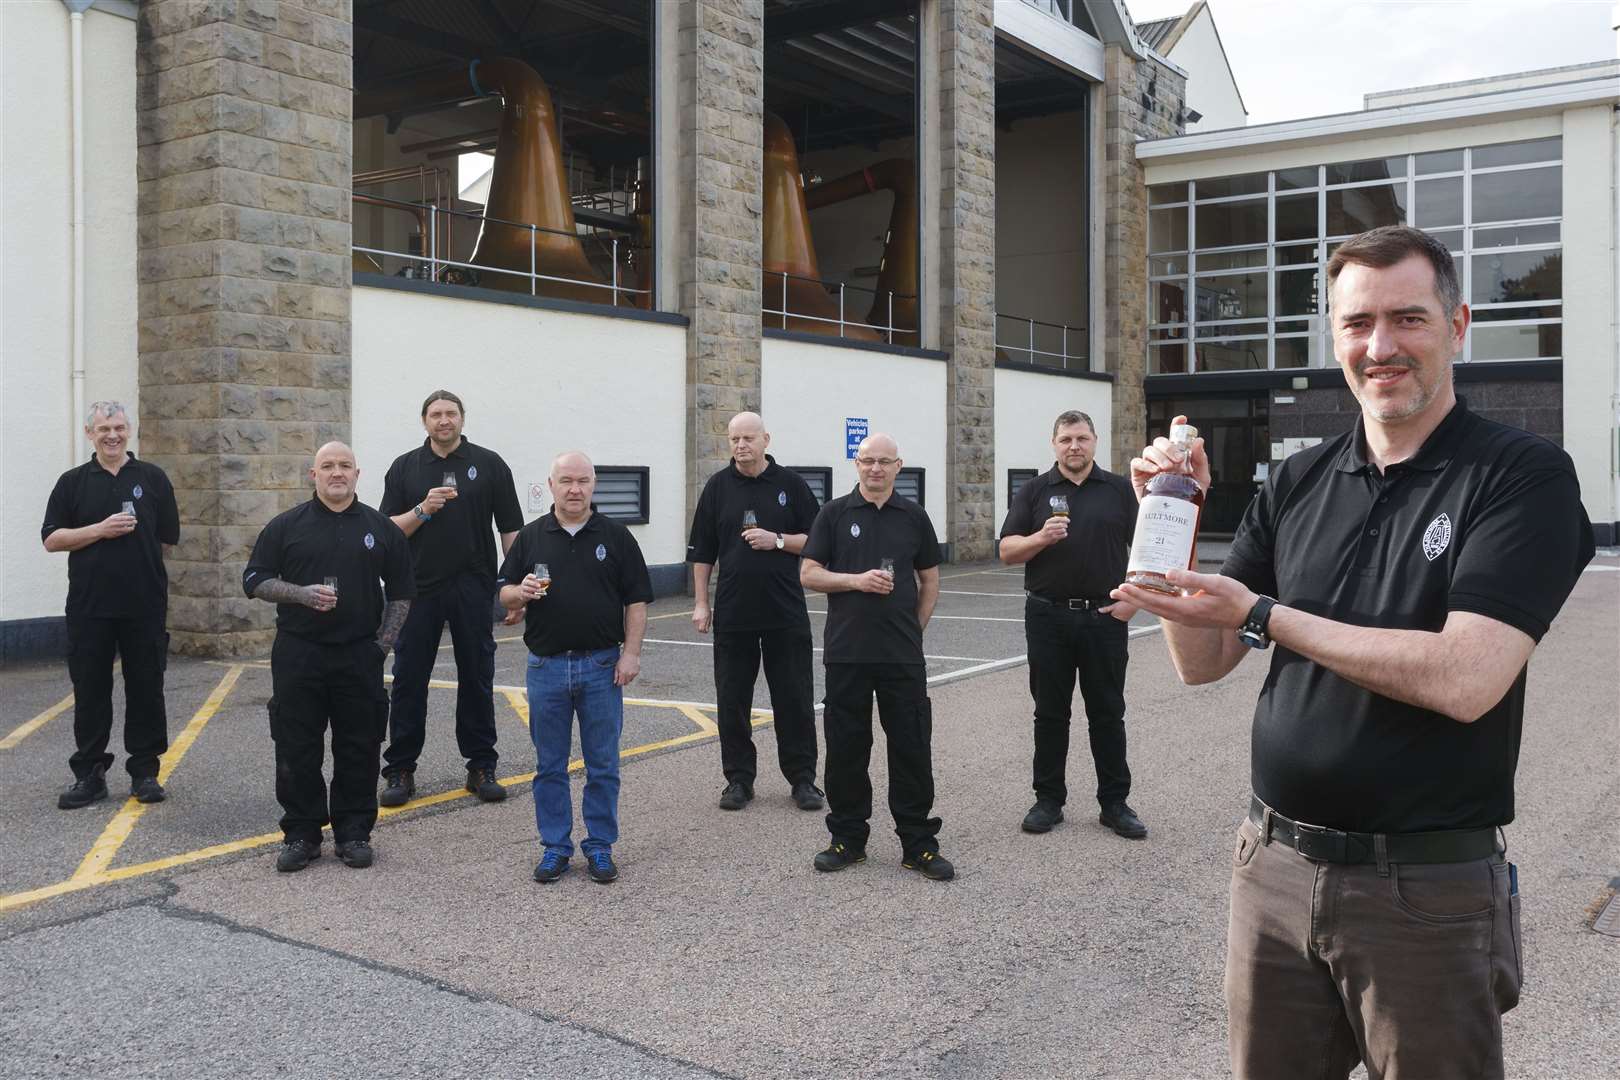 The team at Aultmore Distillery in Moray has announced a £15m expansion plan as it marks 125th anniversary.